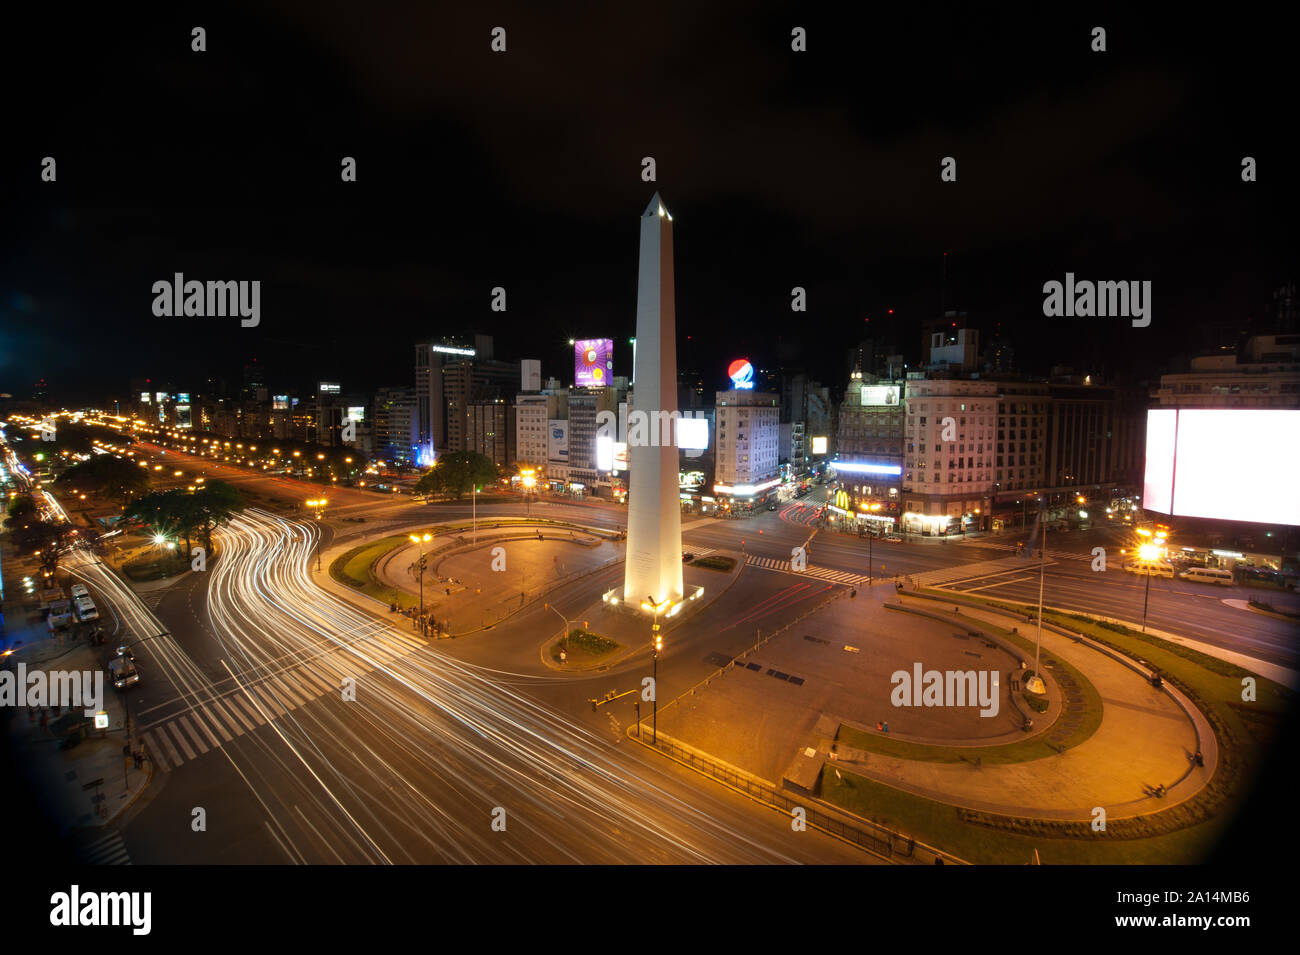 Buenos Aires, Argentina - November 13 2012: After the rush hour and traffic on the sreets of Buenos Aires city by night. This photo shows the downtown Stock Photo